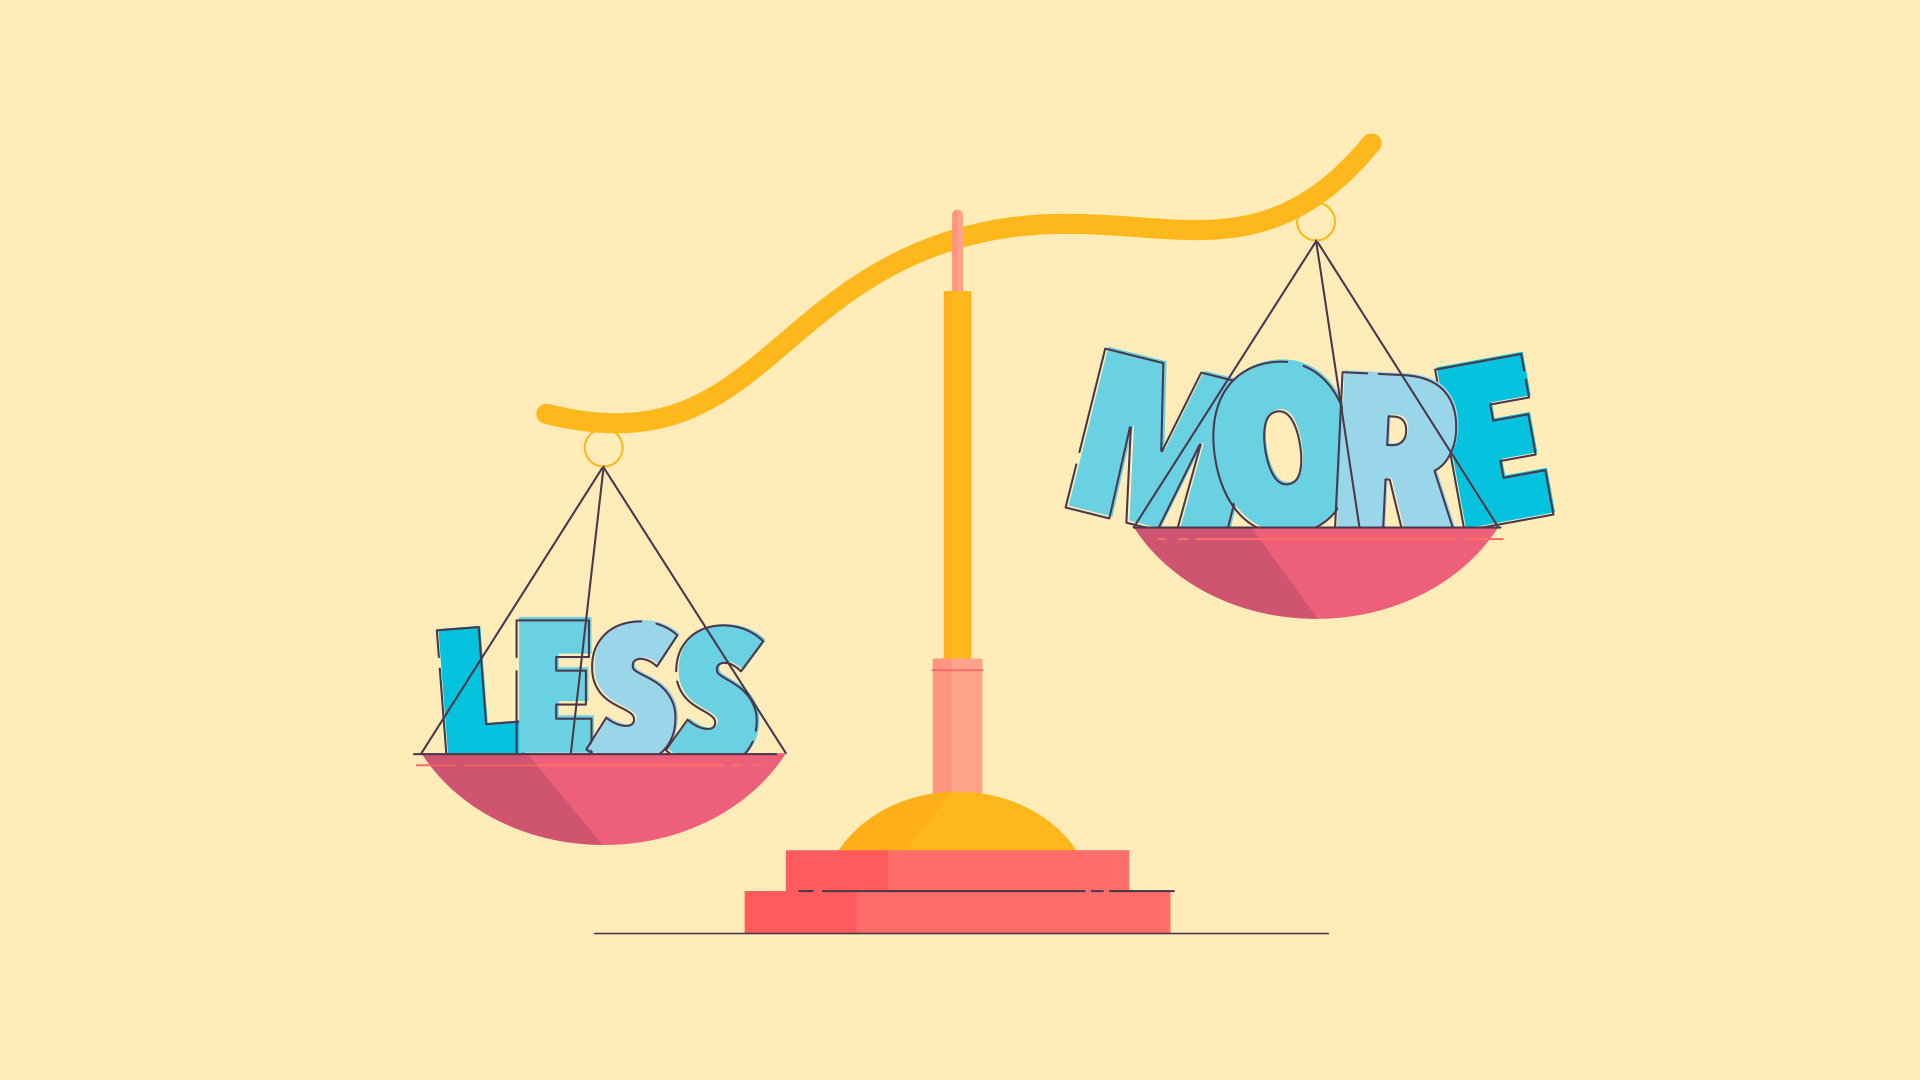 An illustration of the words 'Less' and 'More' on balance scales